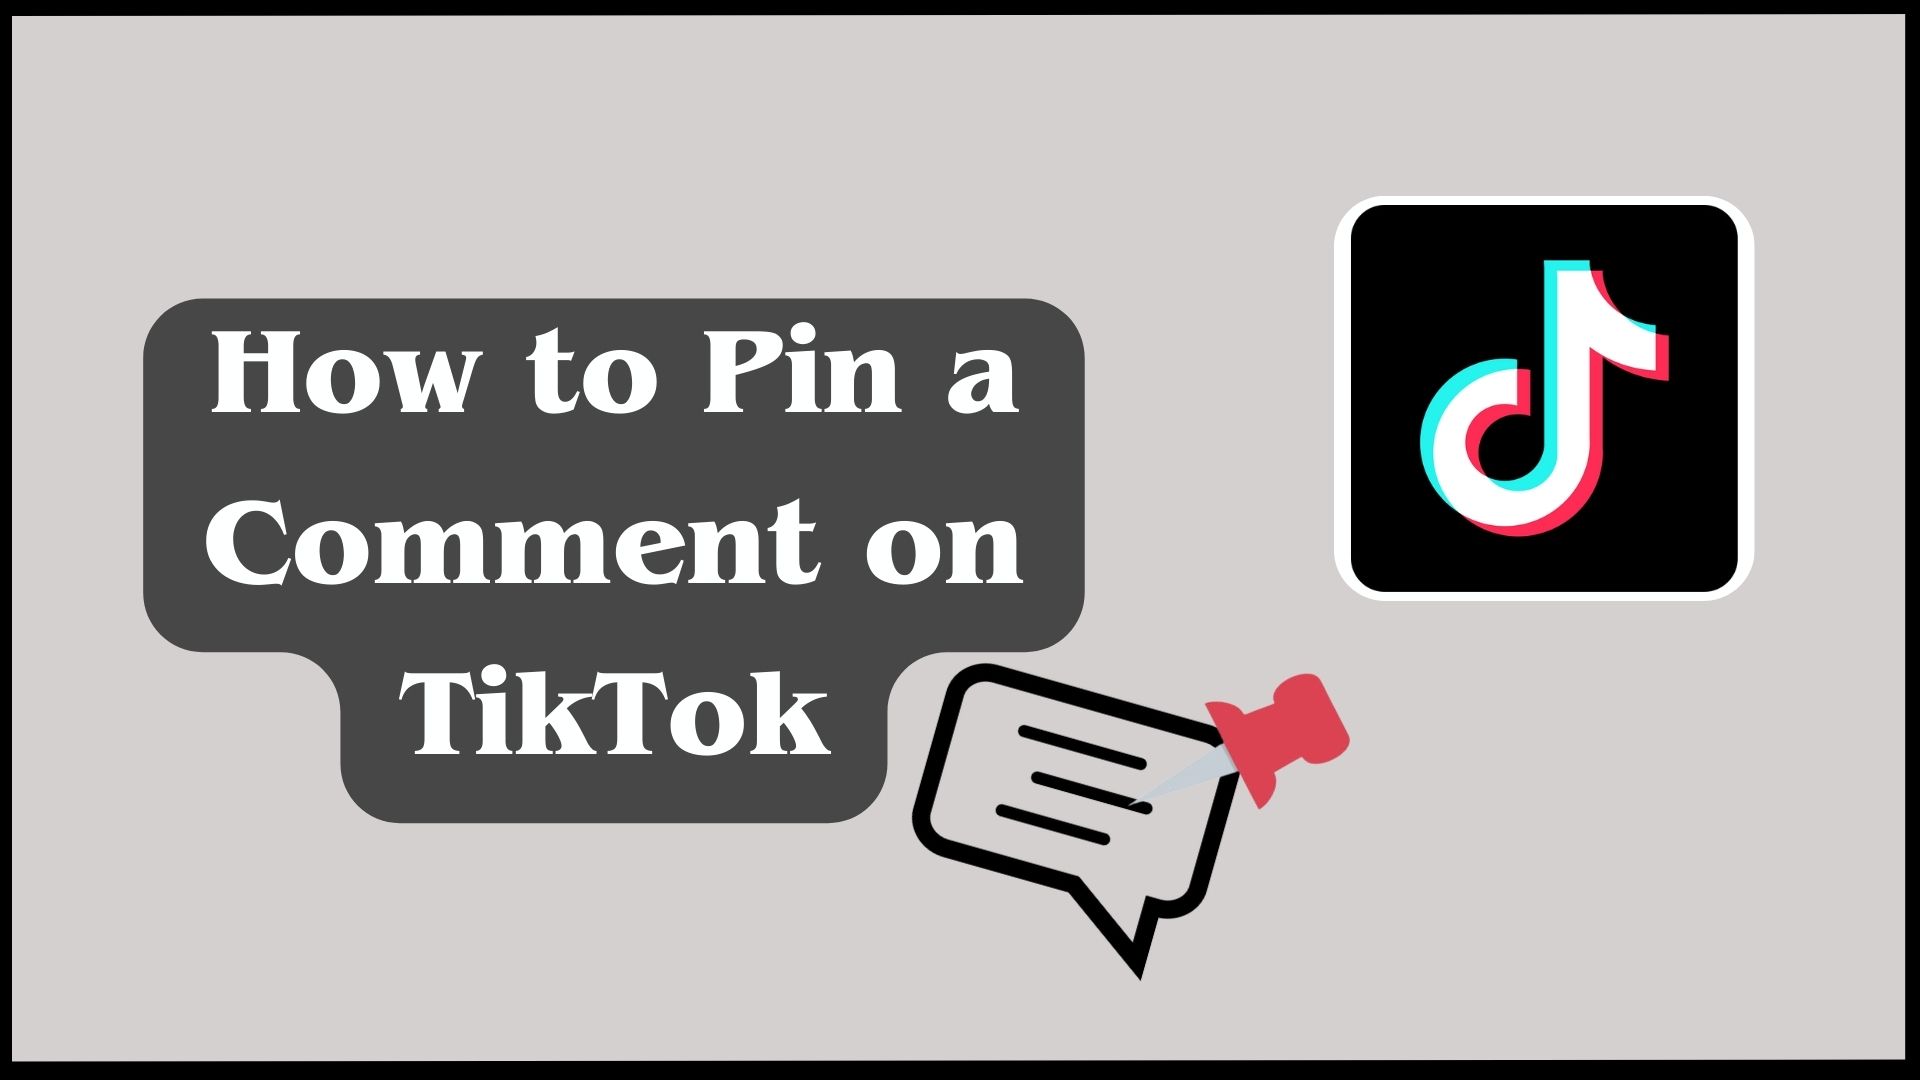 How to Pin a Comment on TikTok